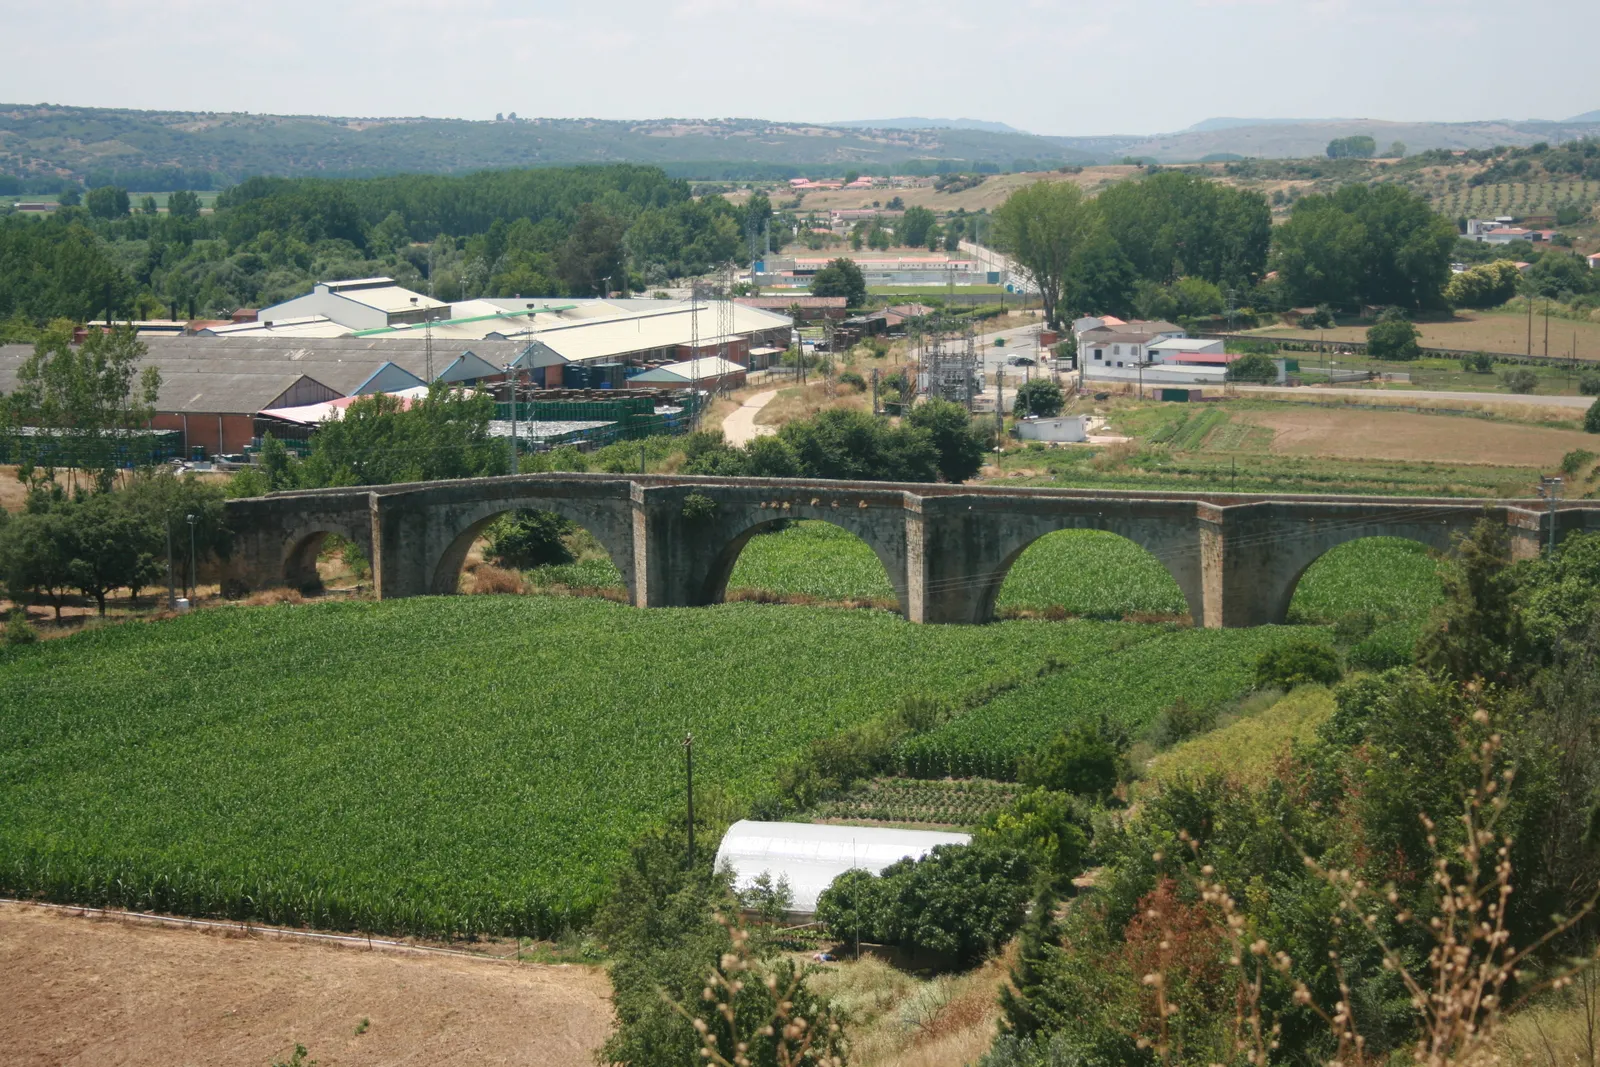 Photo showing: Coria old bridge. The river has changed course, and no longer flows beneath the bridge. Instead there are fields of green crops